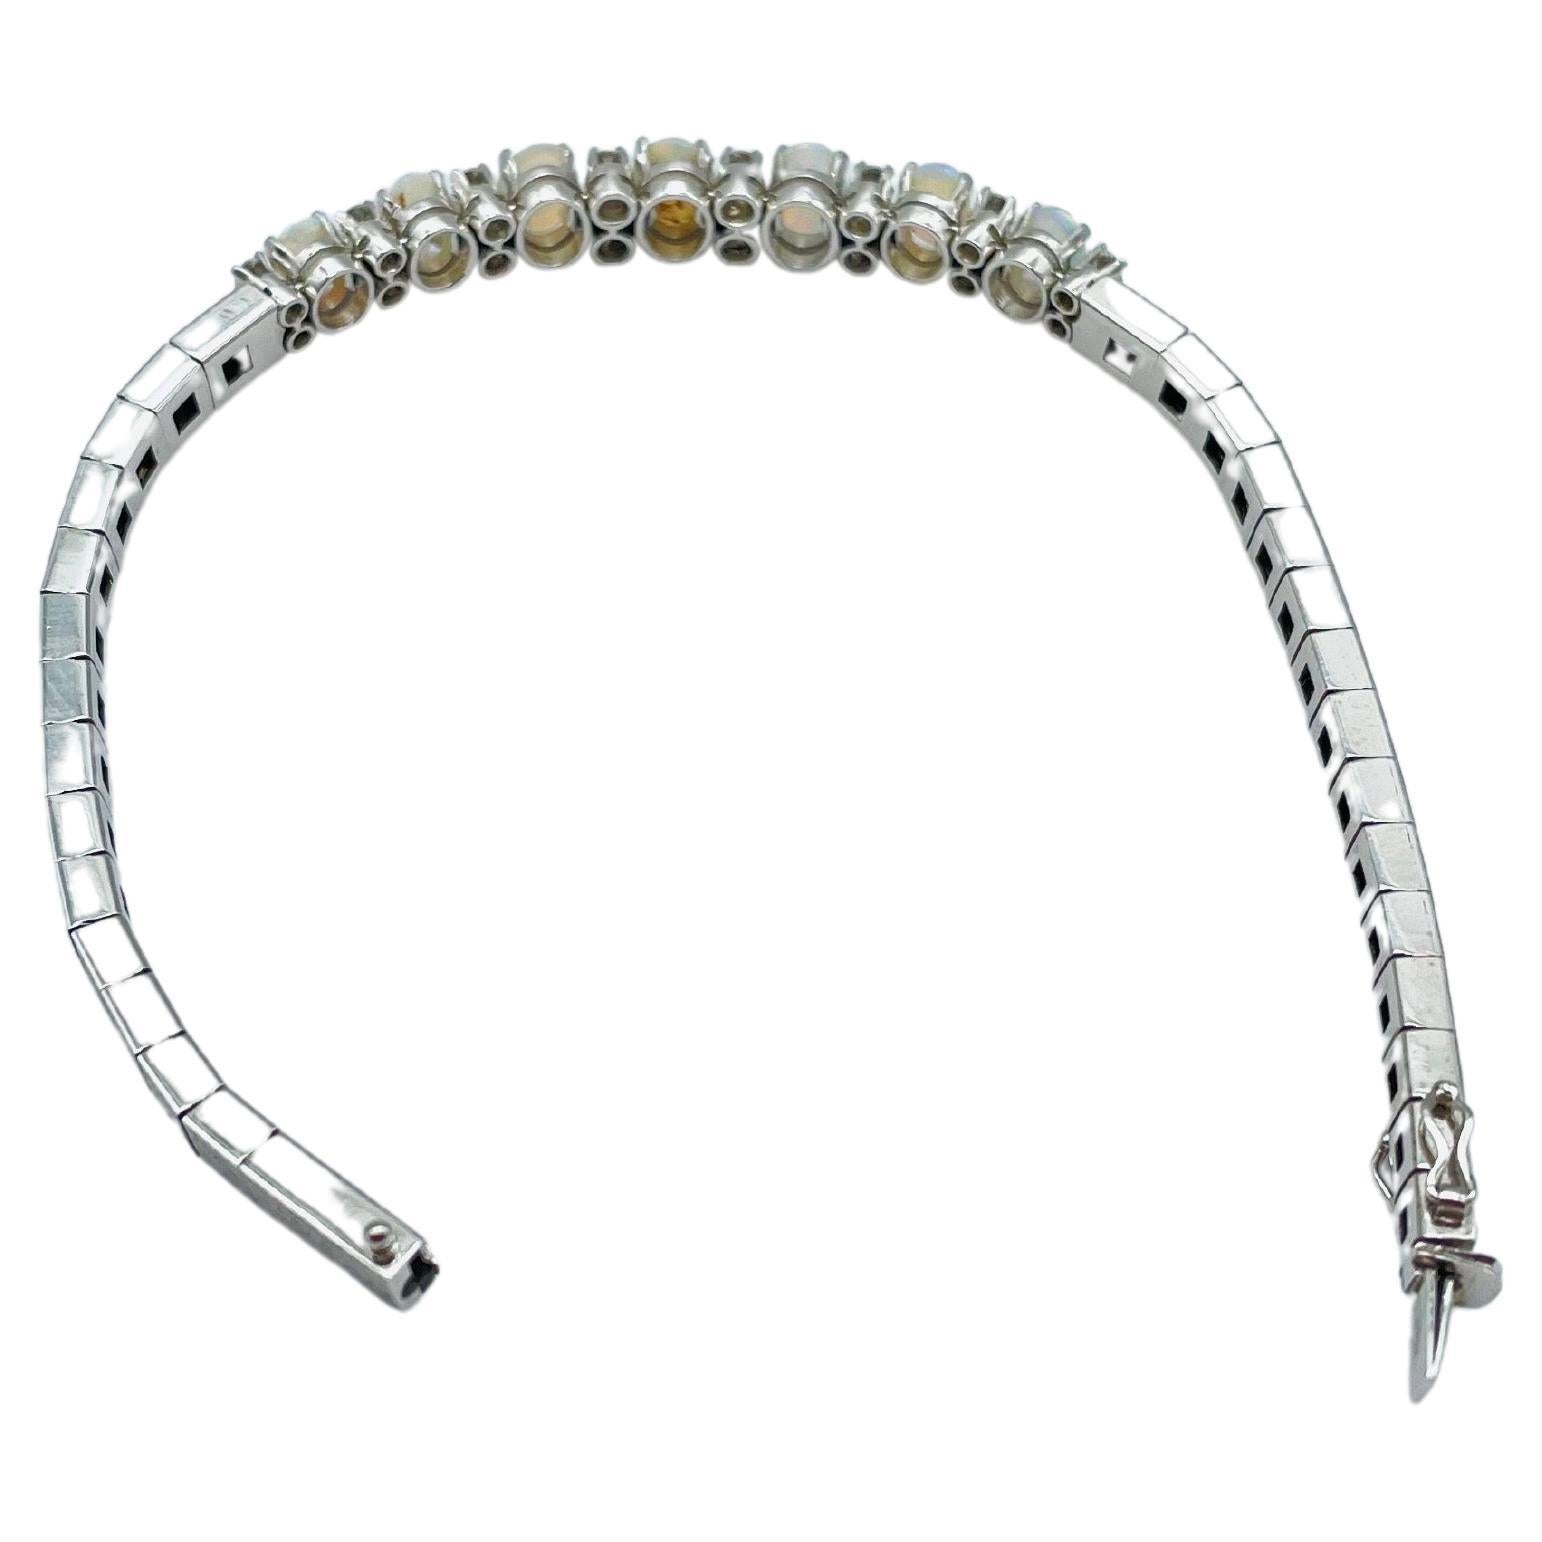 Aesthetic Movement Majestic Whitegold Bracelet with Diamonds and Crystal Fire Opal